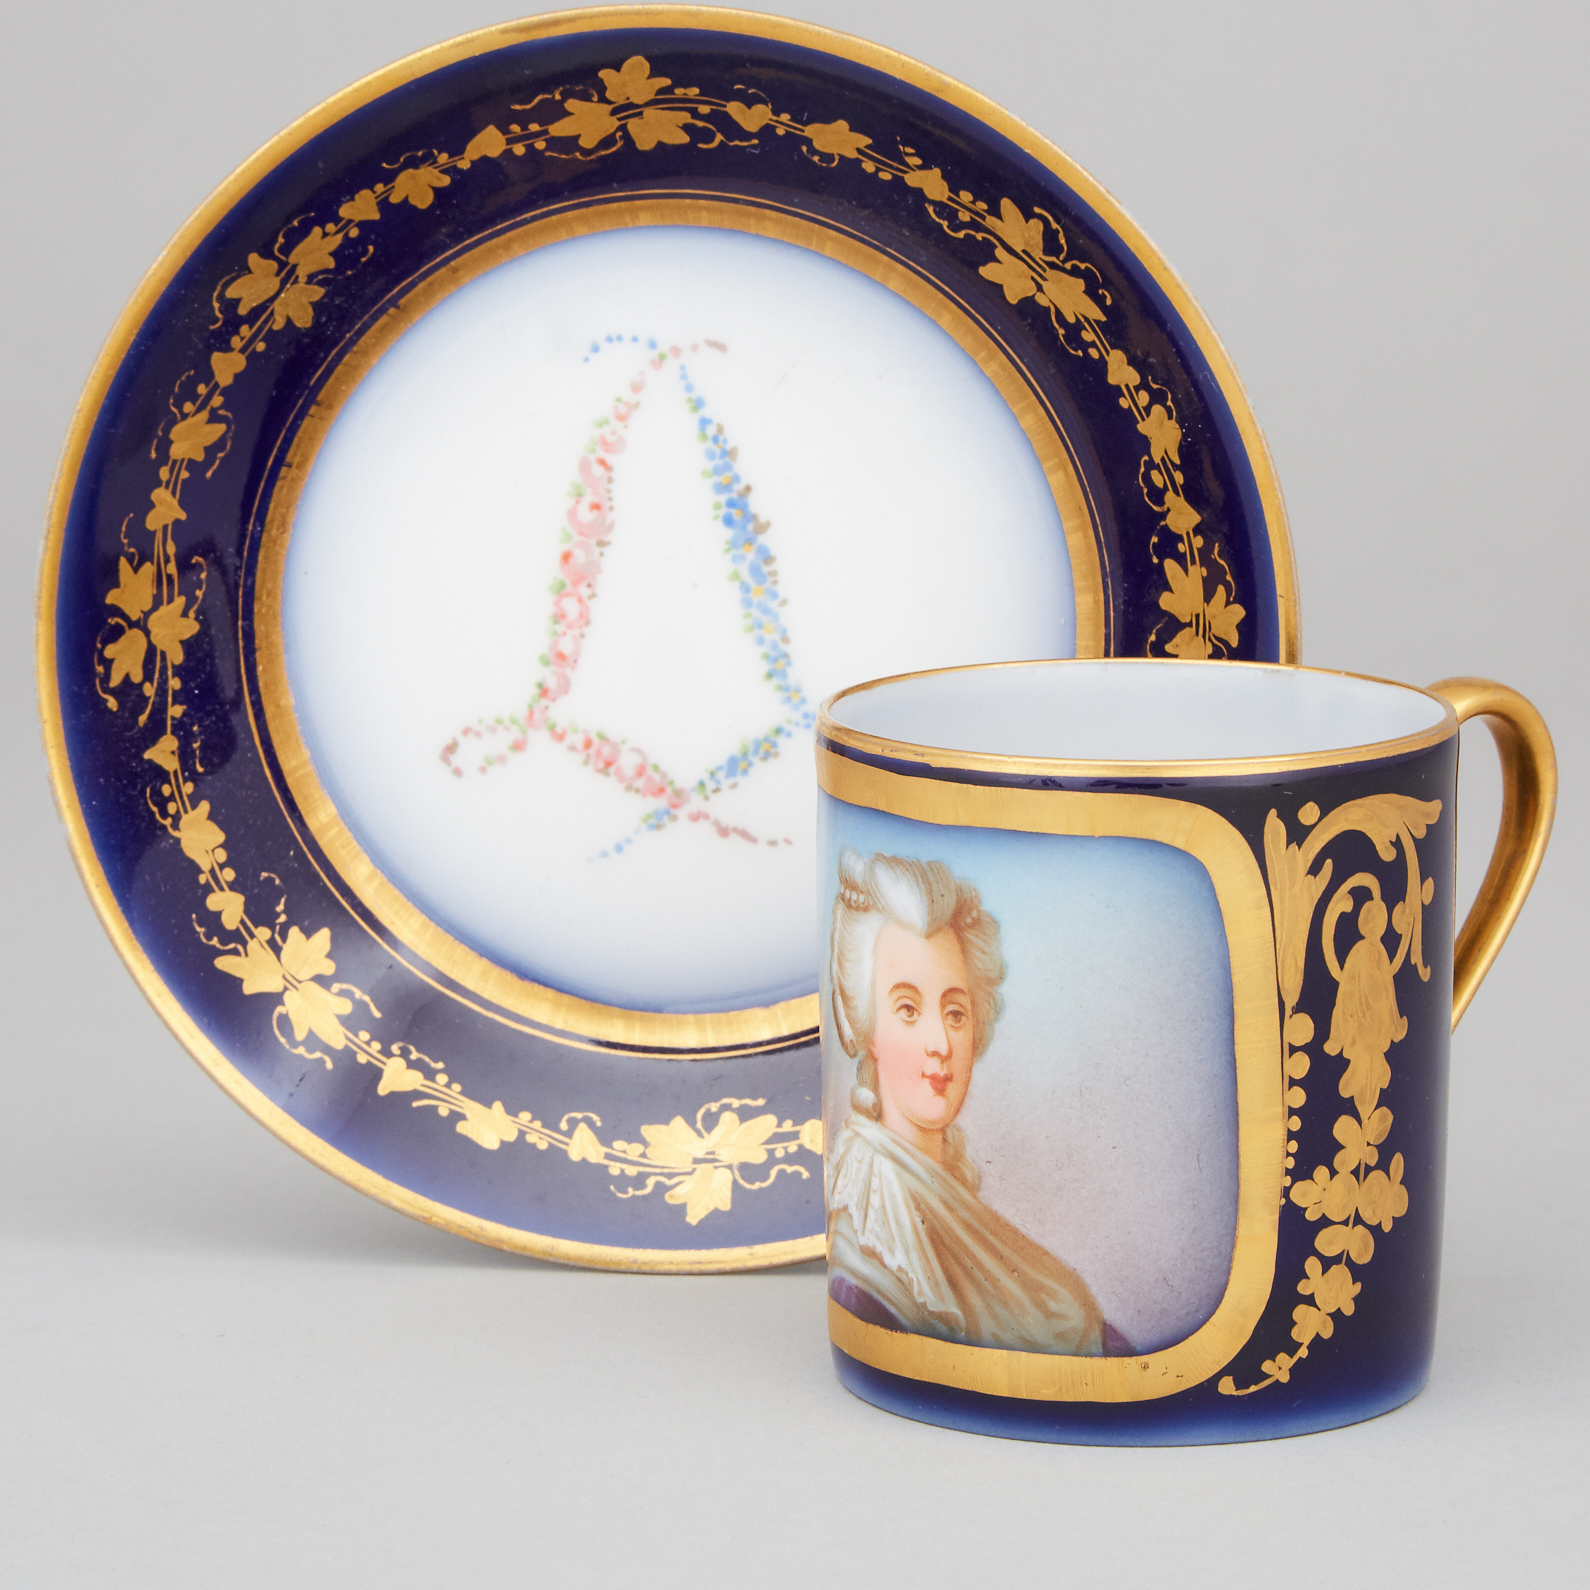 'Sèvres' Portrait Cup and Saucer, 'Marie Antoinette', late 19th century